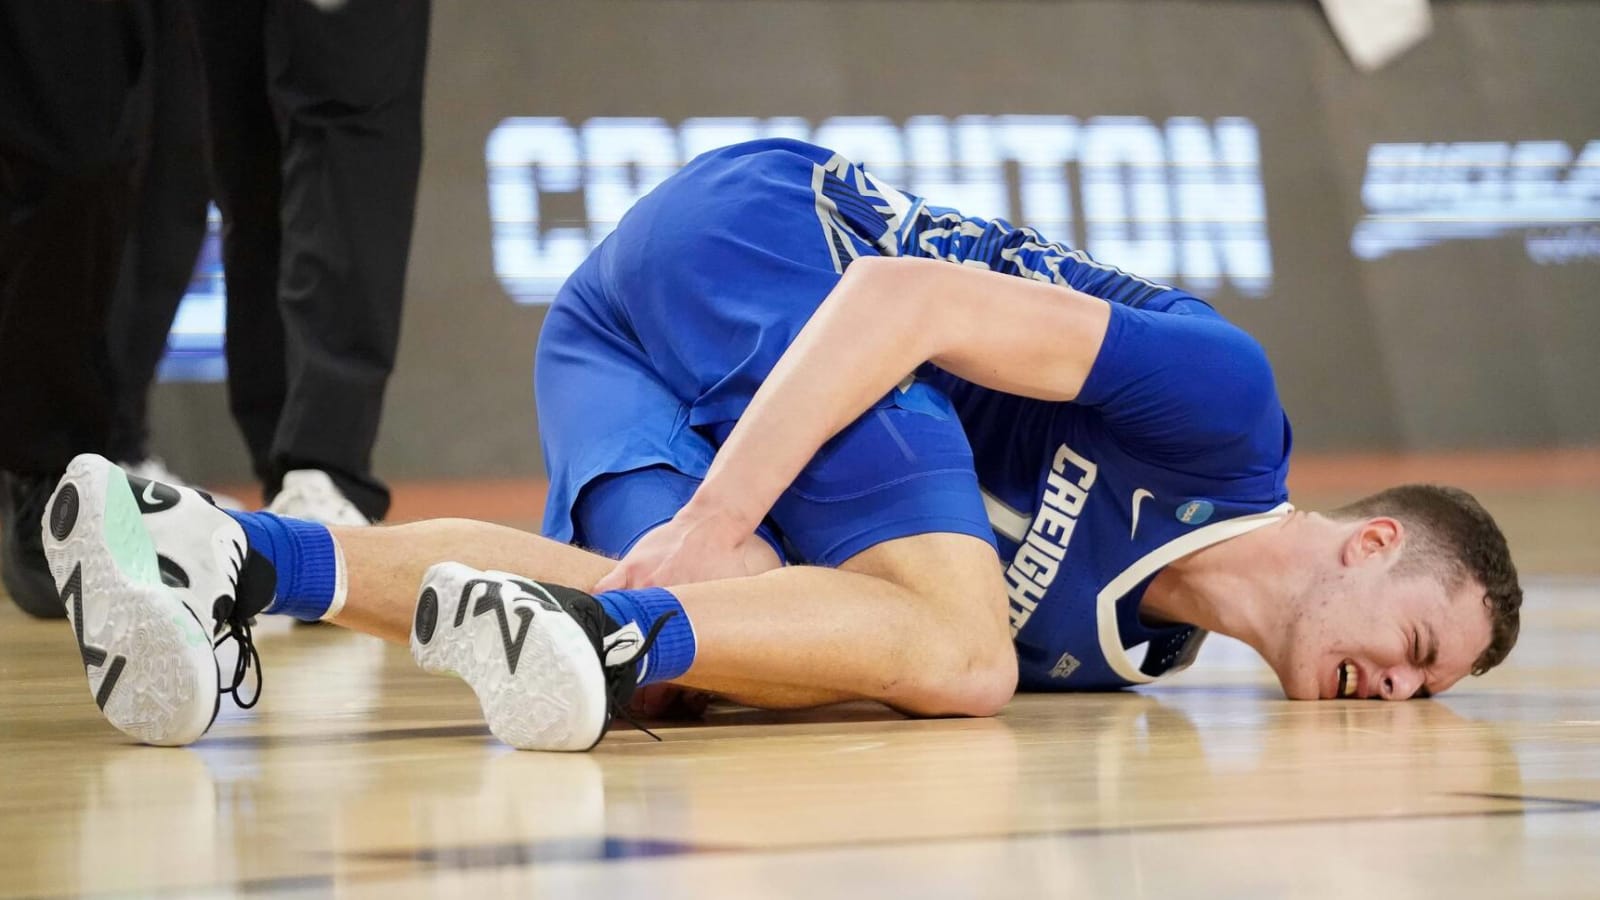 Creighton's Kalkbrenner to miss rest of tourney with knee injury